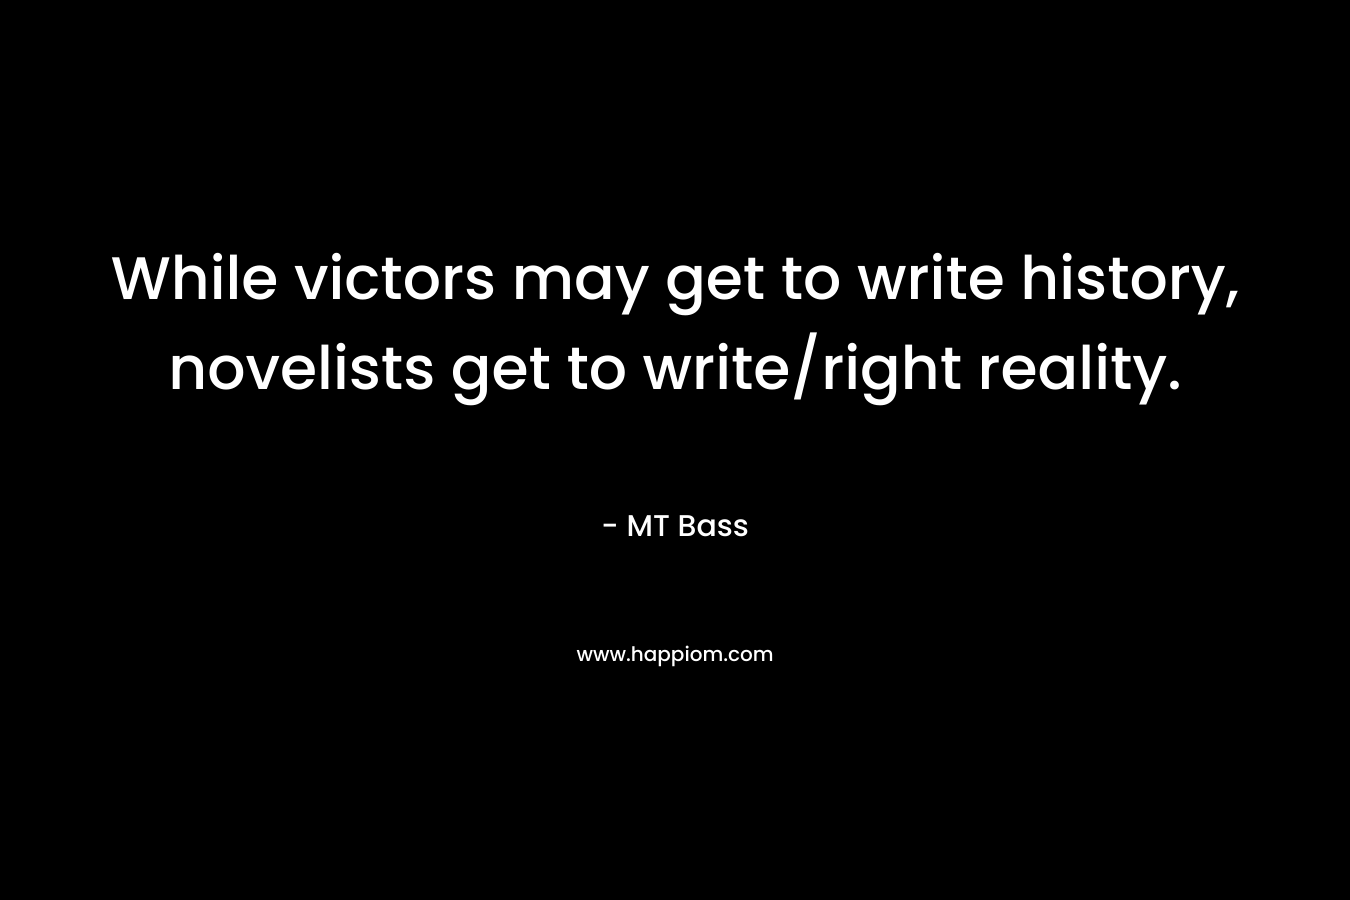 While victors may get to write history, novelists get to write/right reality.